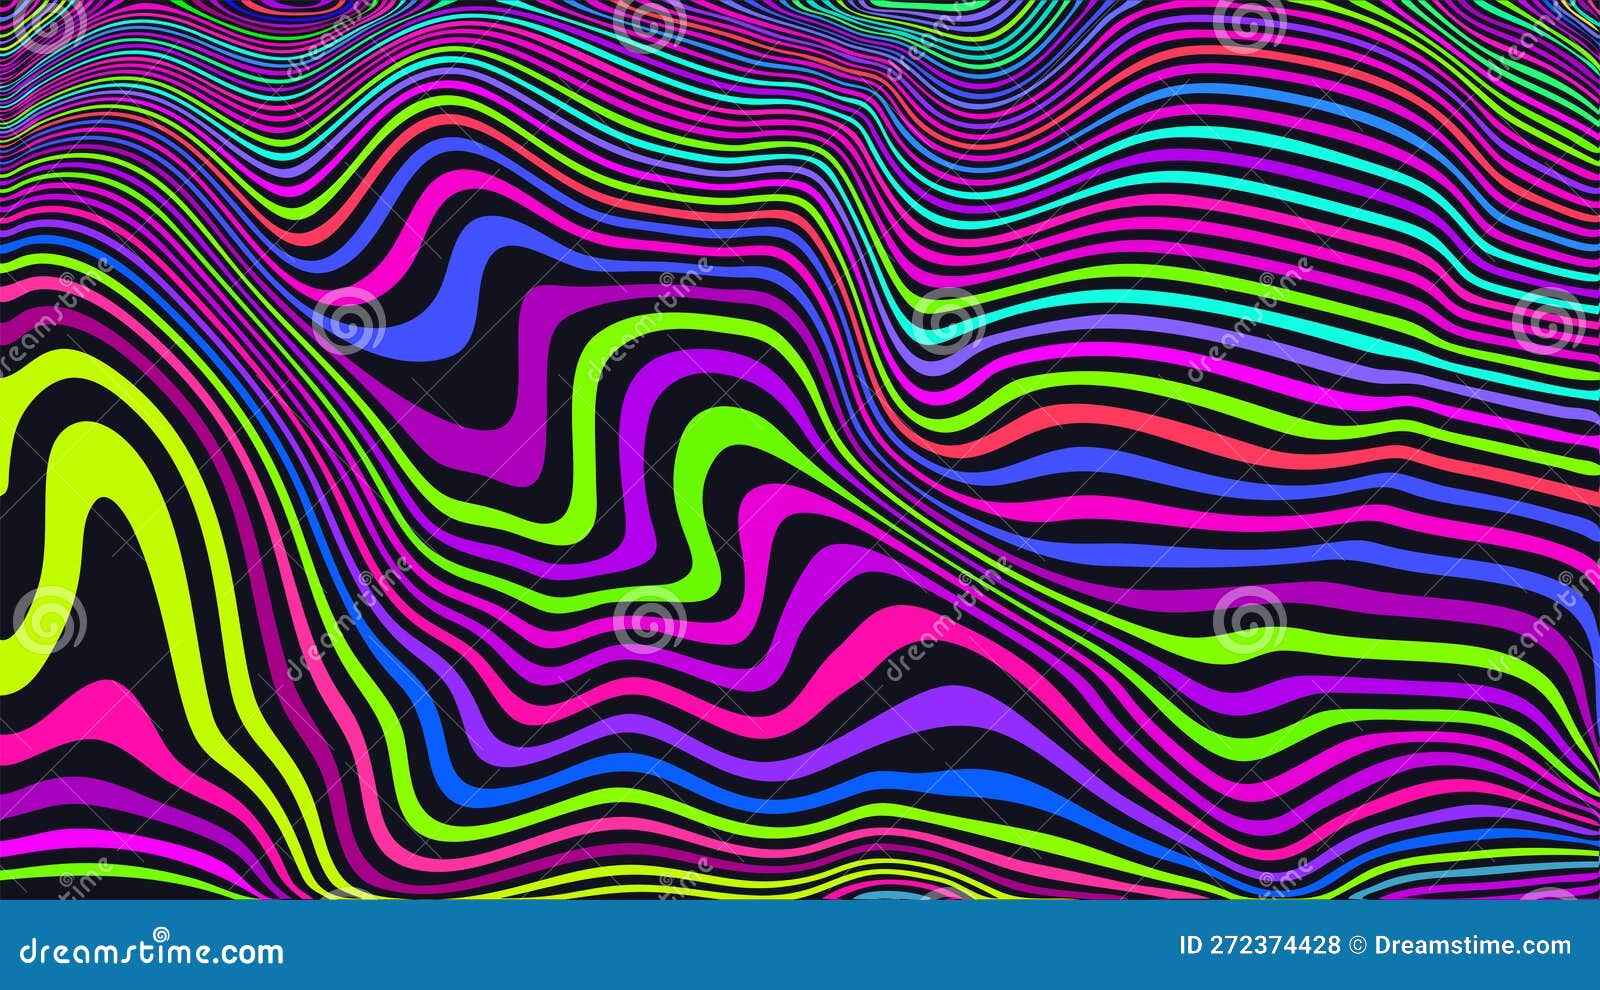 Trippy strip psychedelic pattern. Neon color wavy background Stock